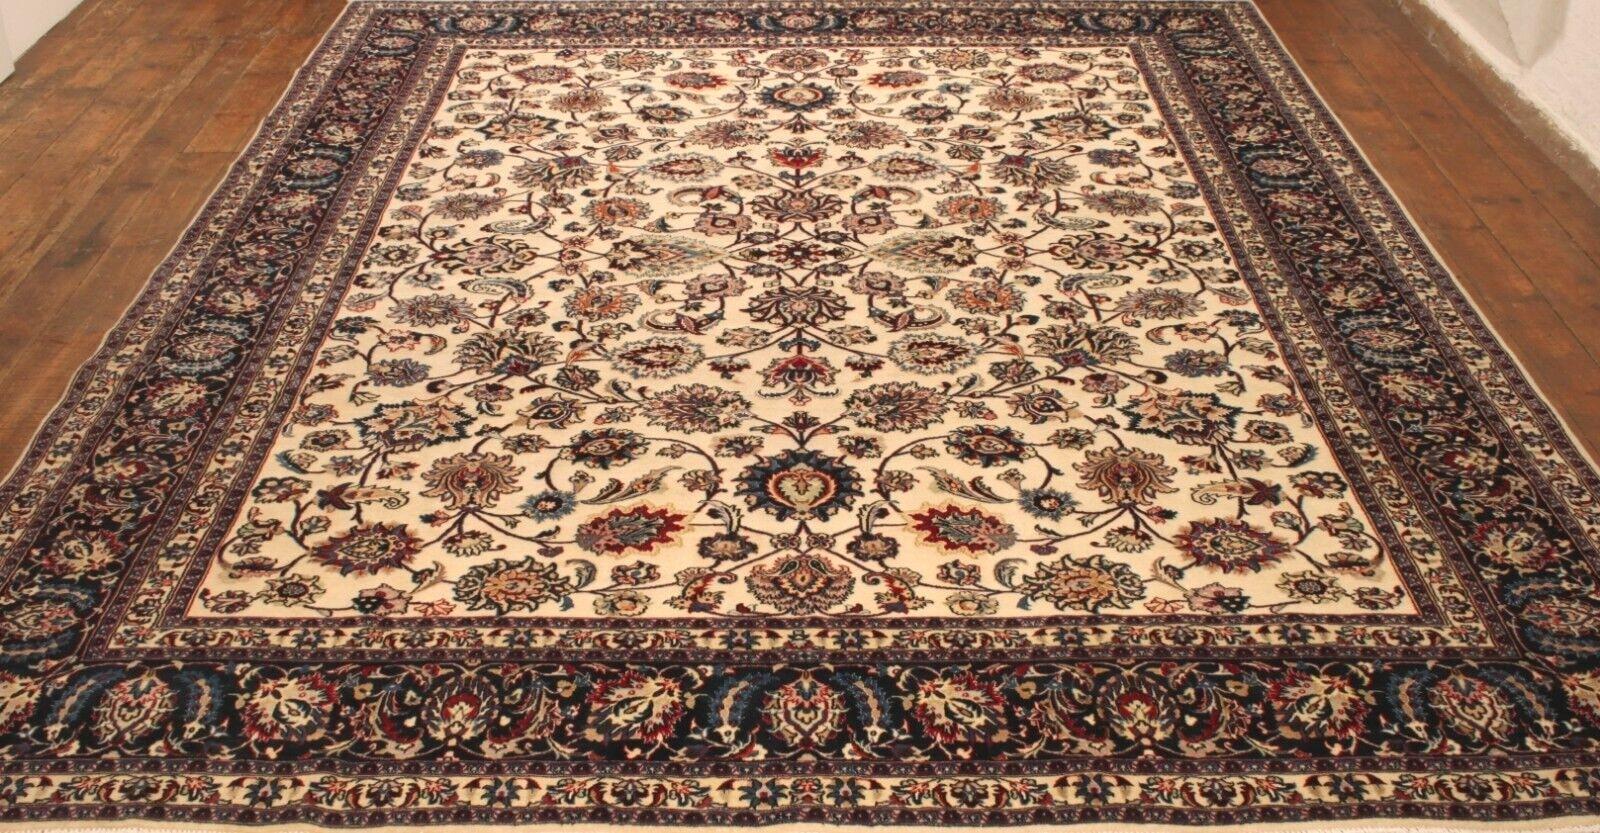 Handmade Contemporary Persian Style Tabriz Rug 10' x 12.7', 2000s - 1T04 For Sale 2